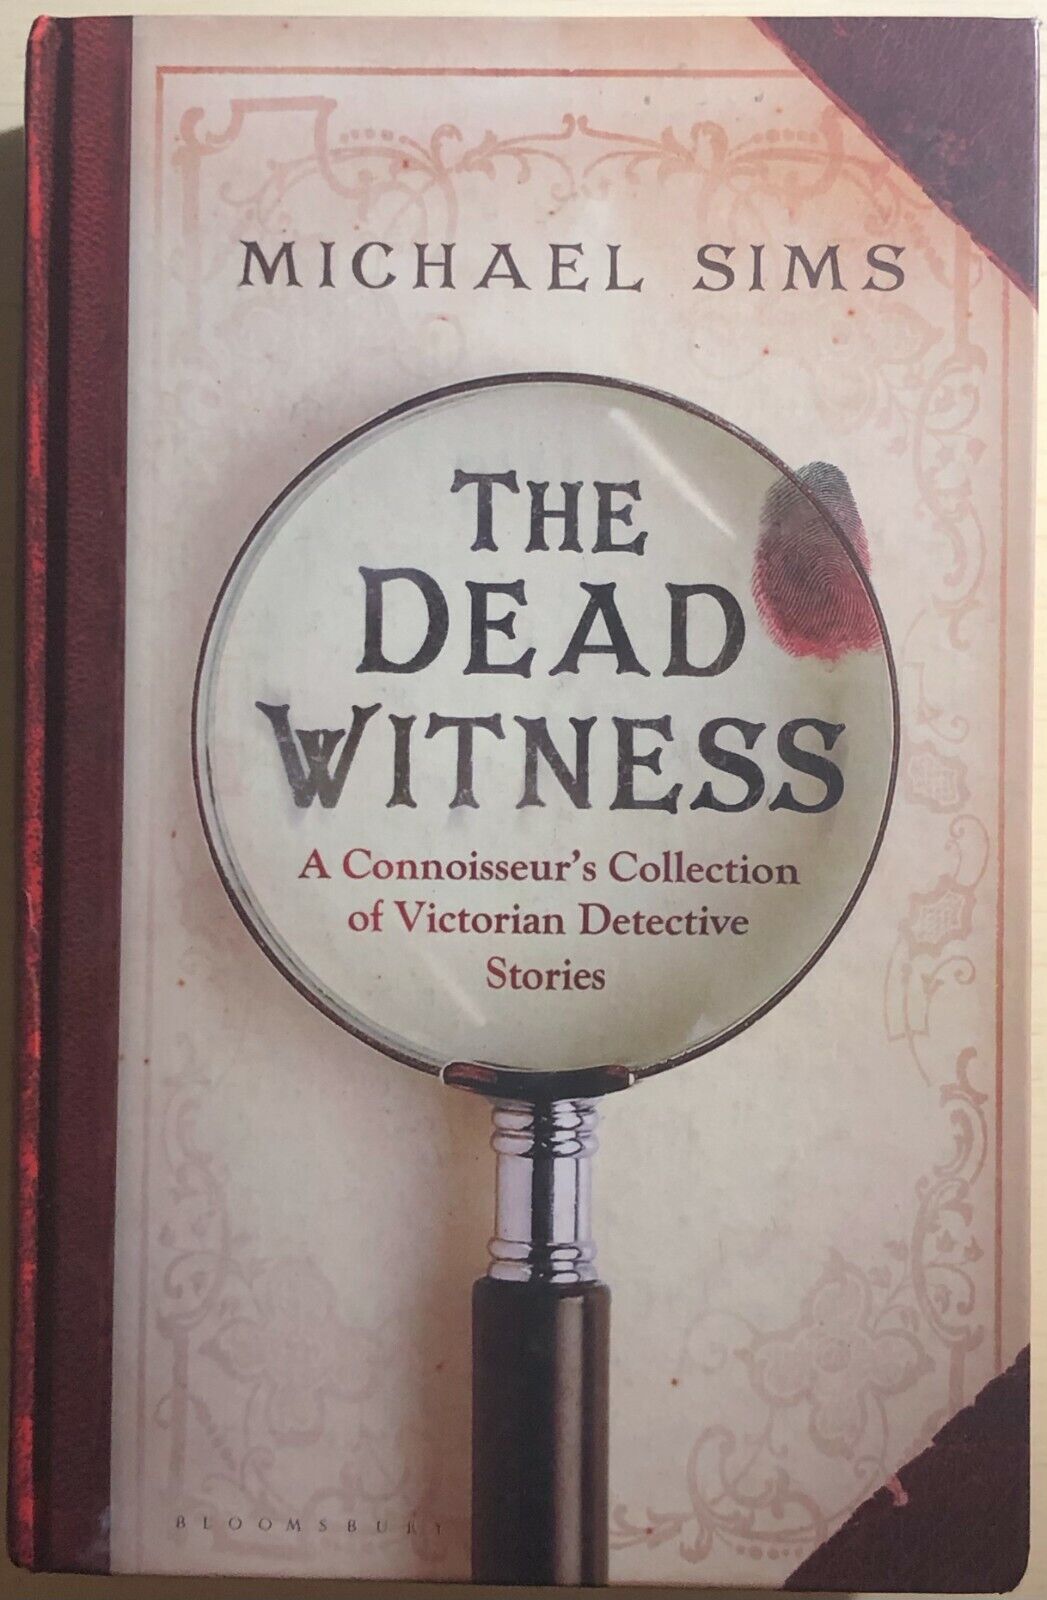 The dead witness di Michael Sims, 2011, Bloomsbury